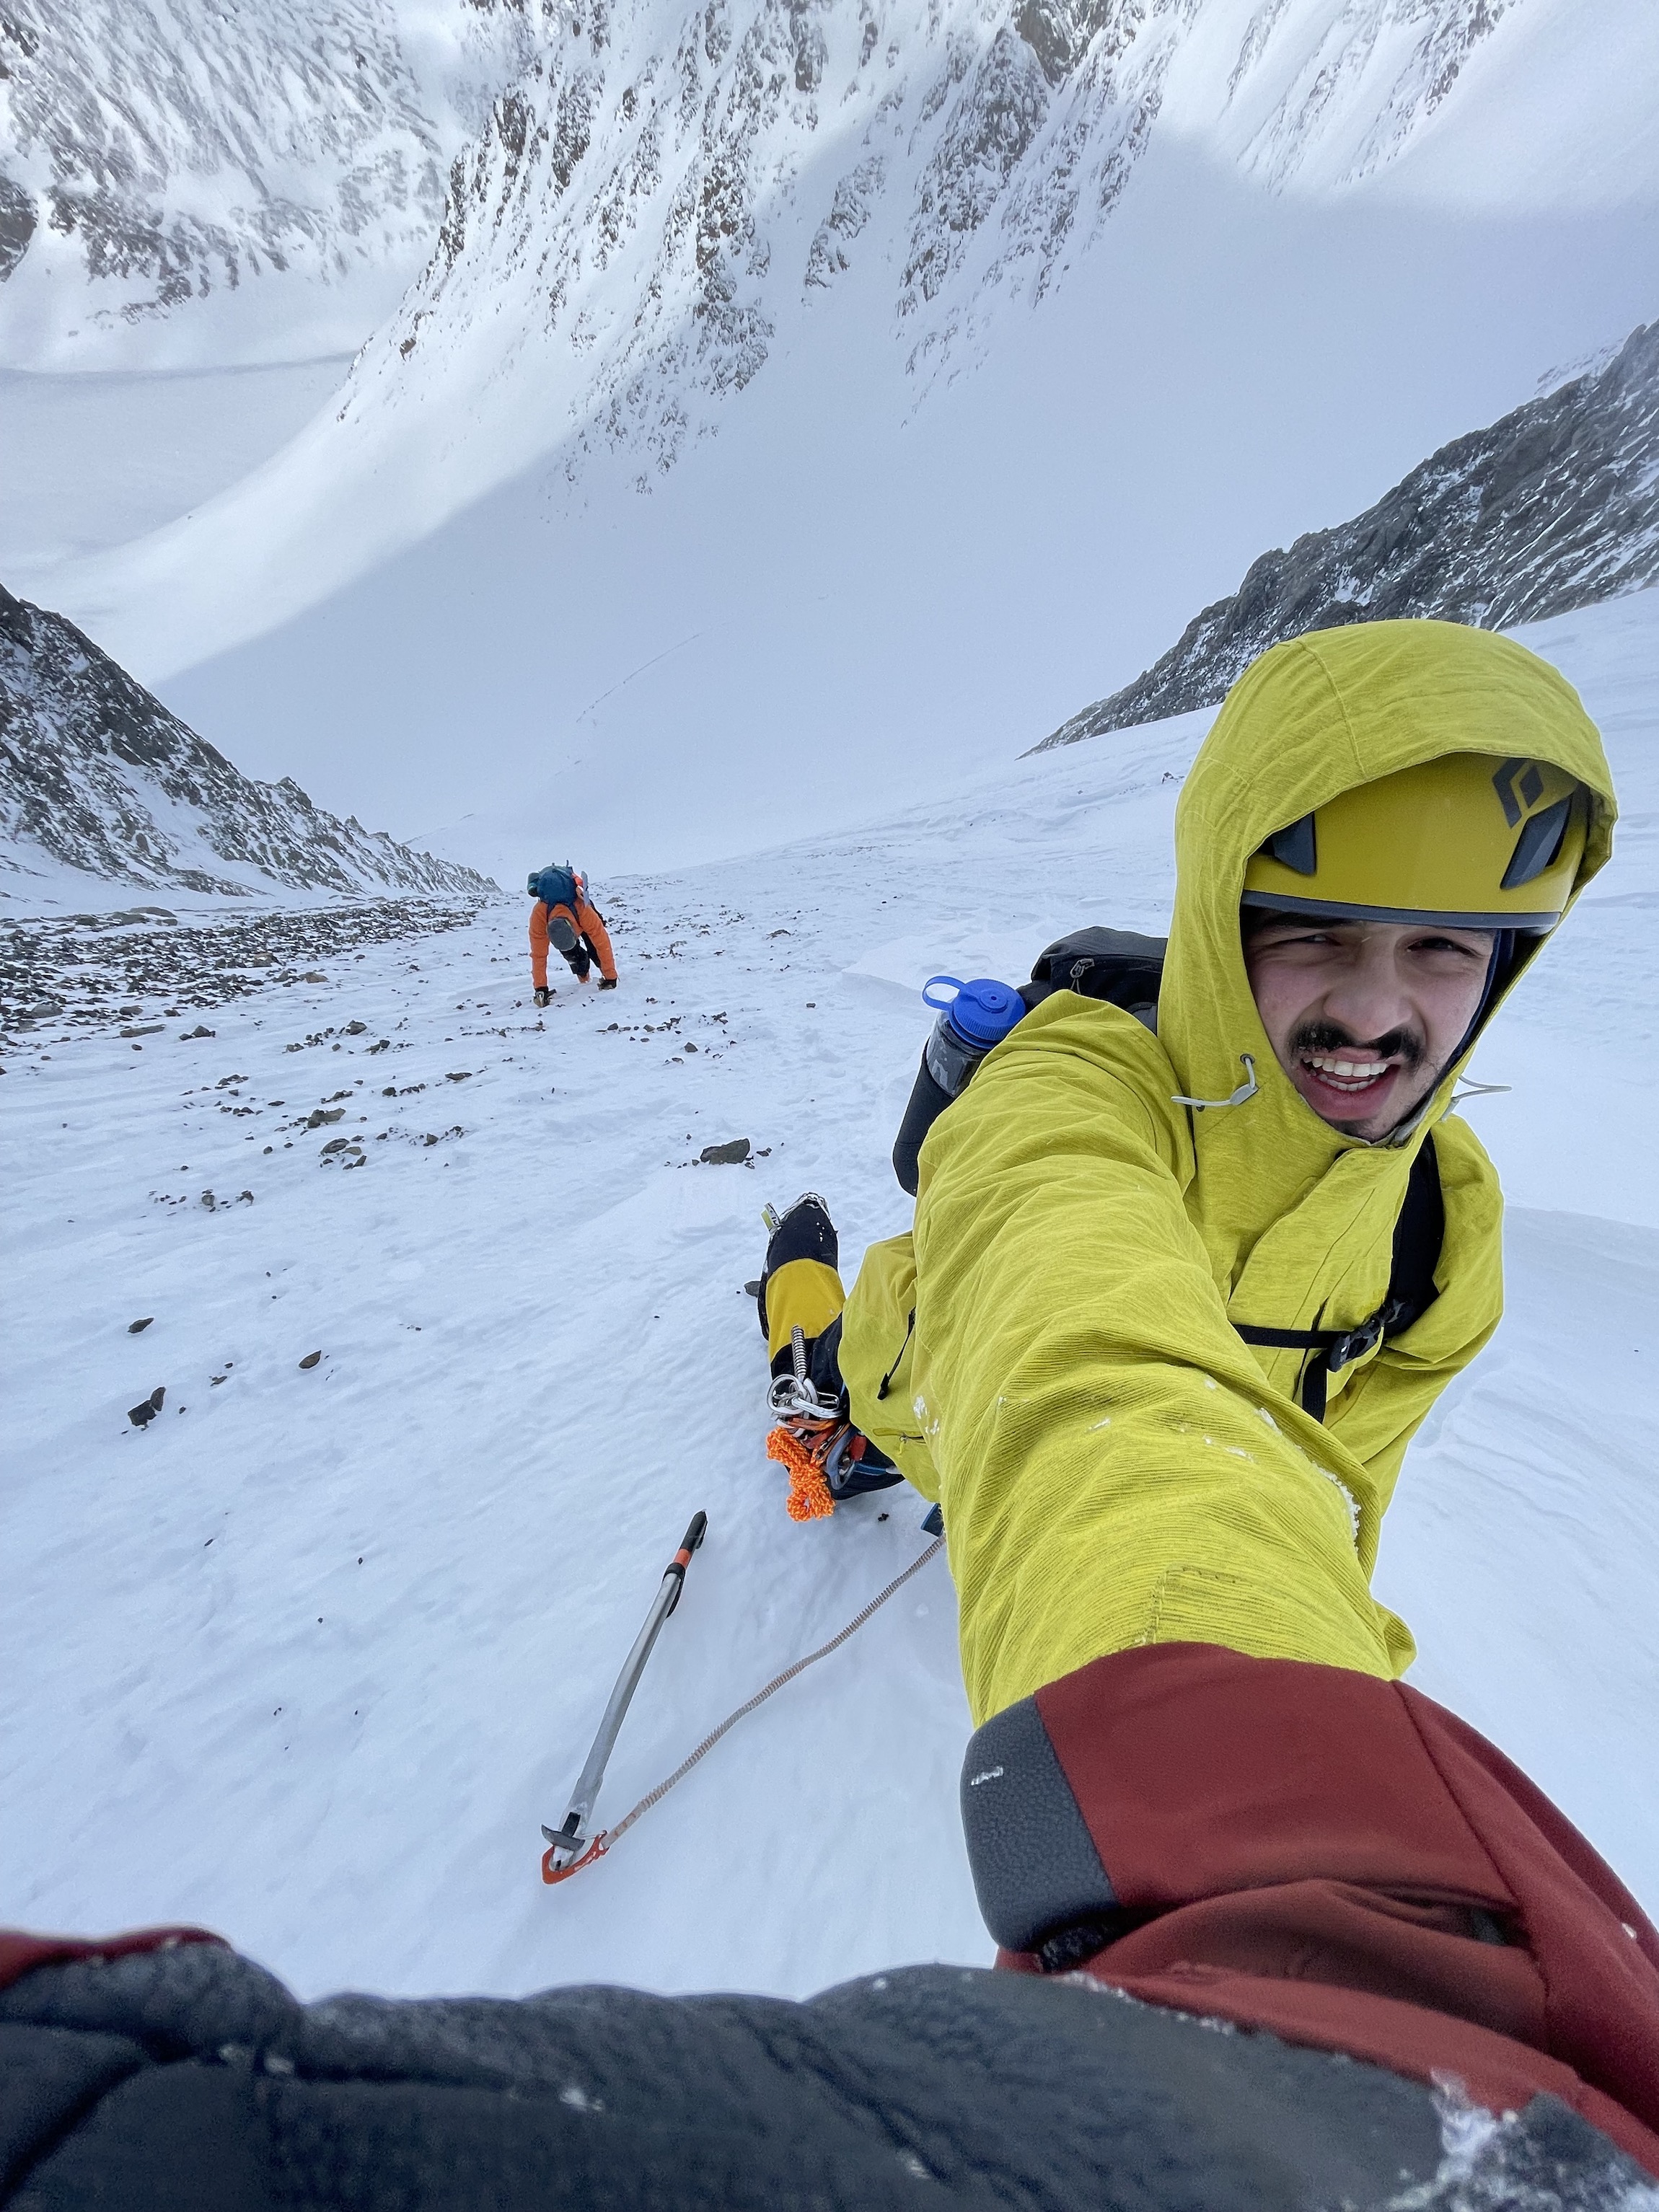 close-up of a mountain climber in a yellow jacket jacket and helmet reaching up towards the camera with another climber lower down the slope